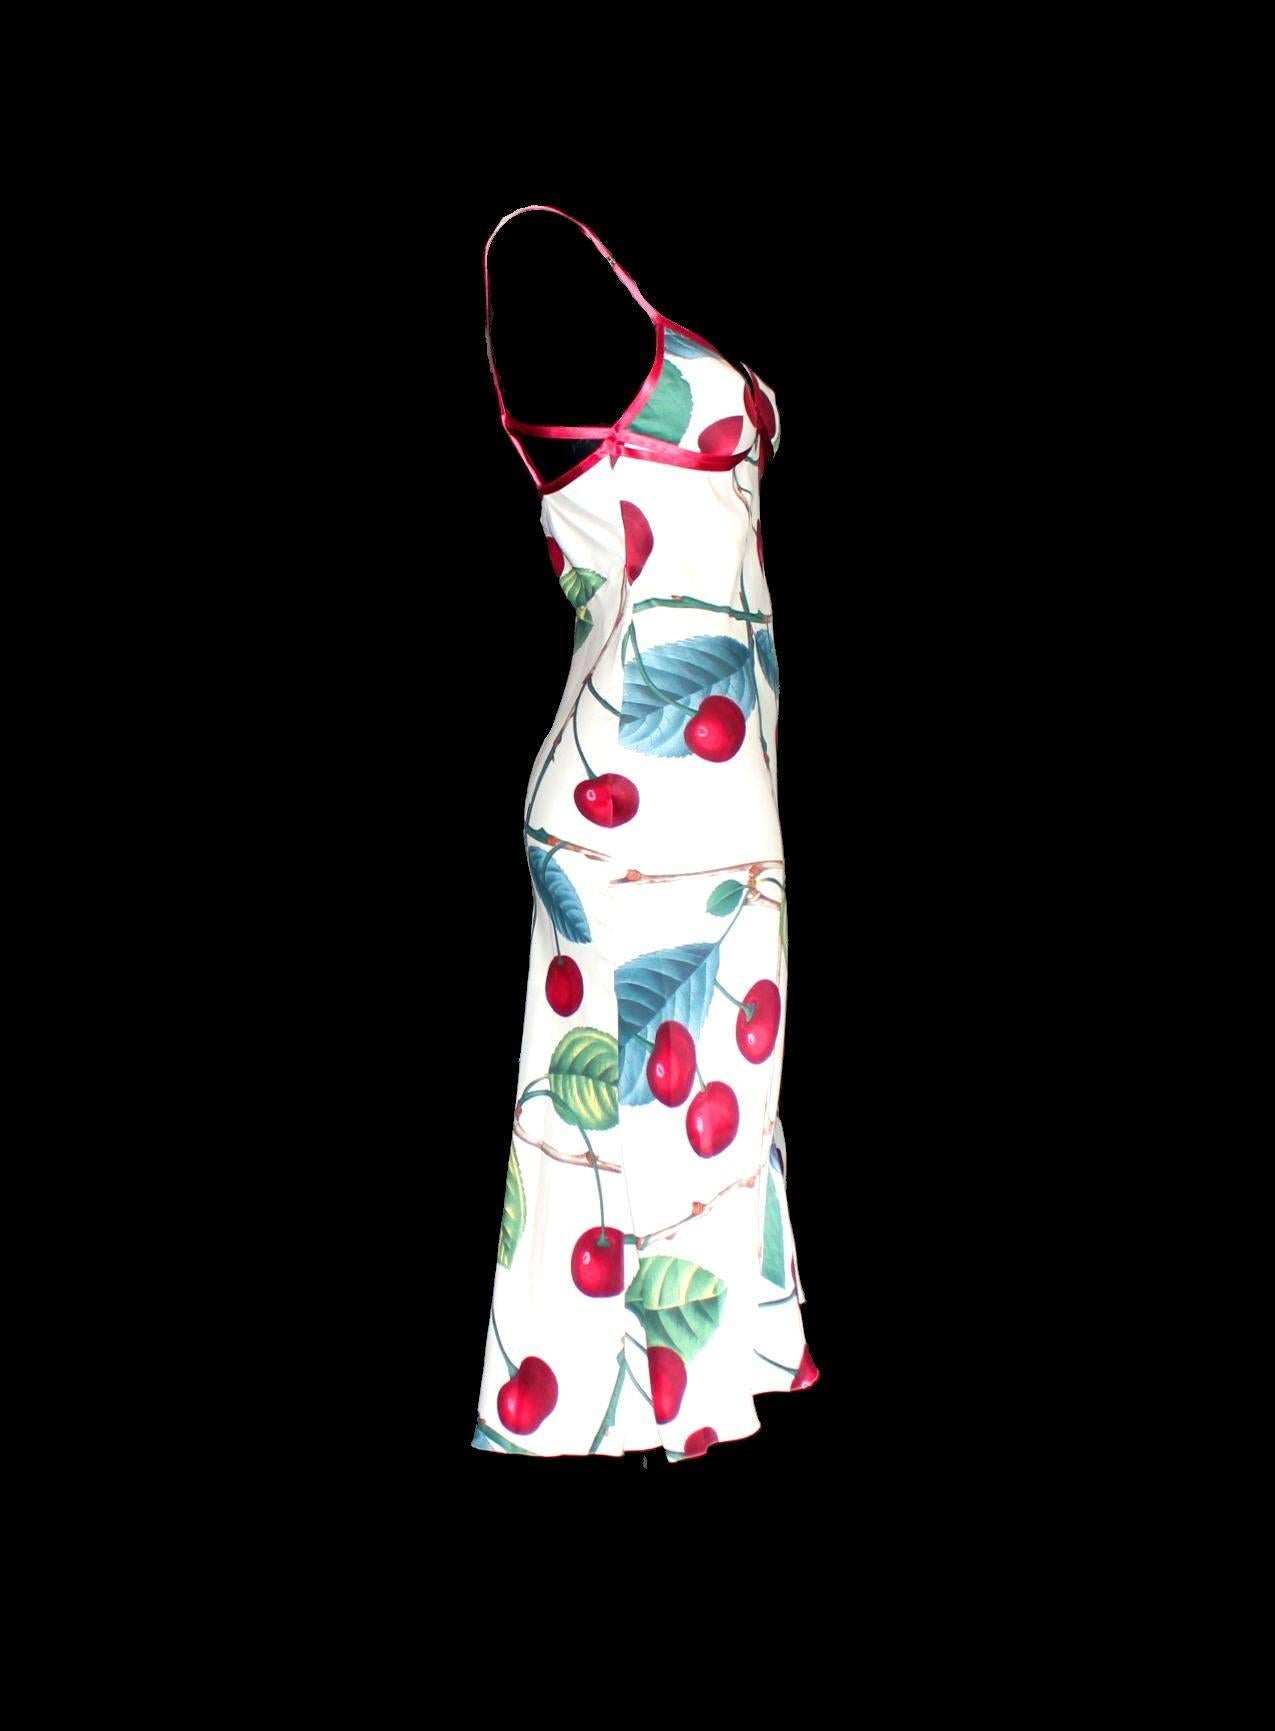 Stunning John Galliano Dress from his famous 2003 collection
Get a unique piece nobody else will wear!
Finest silk with cherry print
Signature silk buttons on side
Simply slips on
Made in France
Dry Clean Only
Size 36

It is from the famous